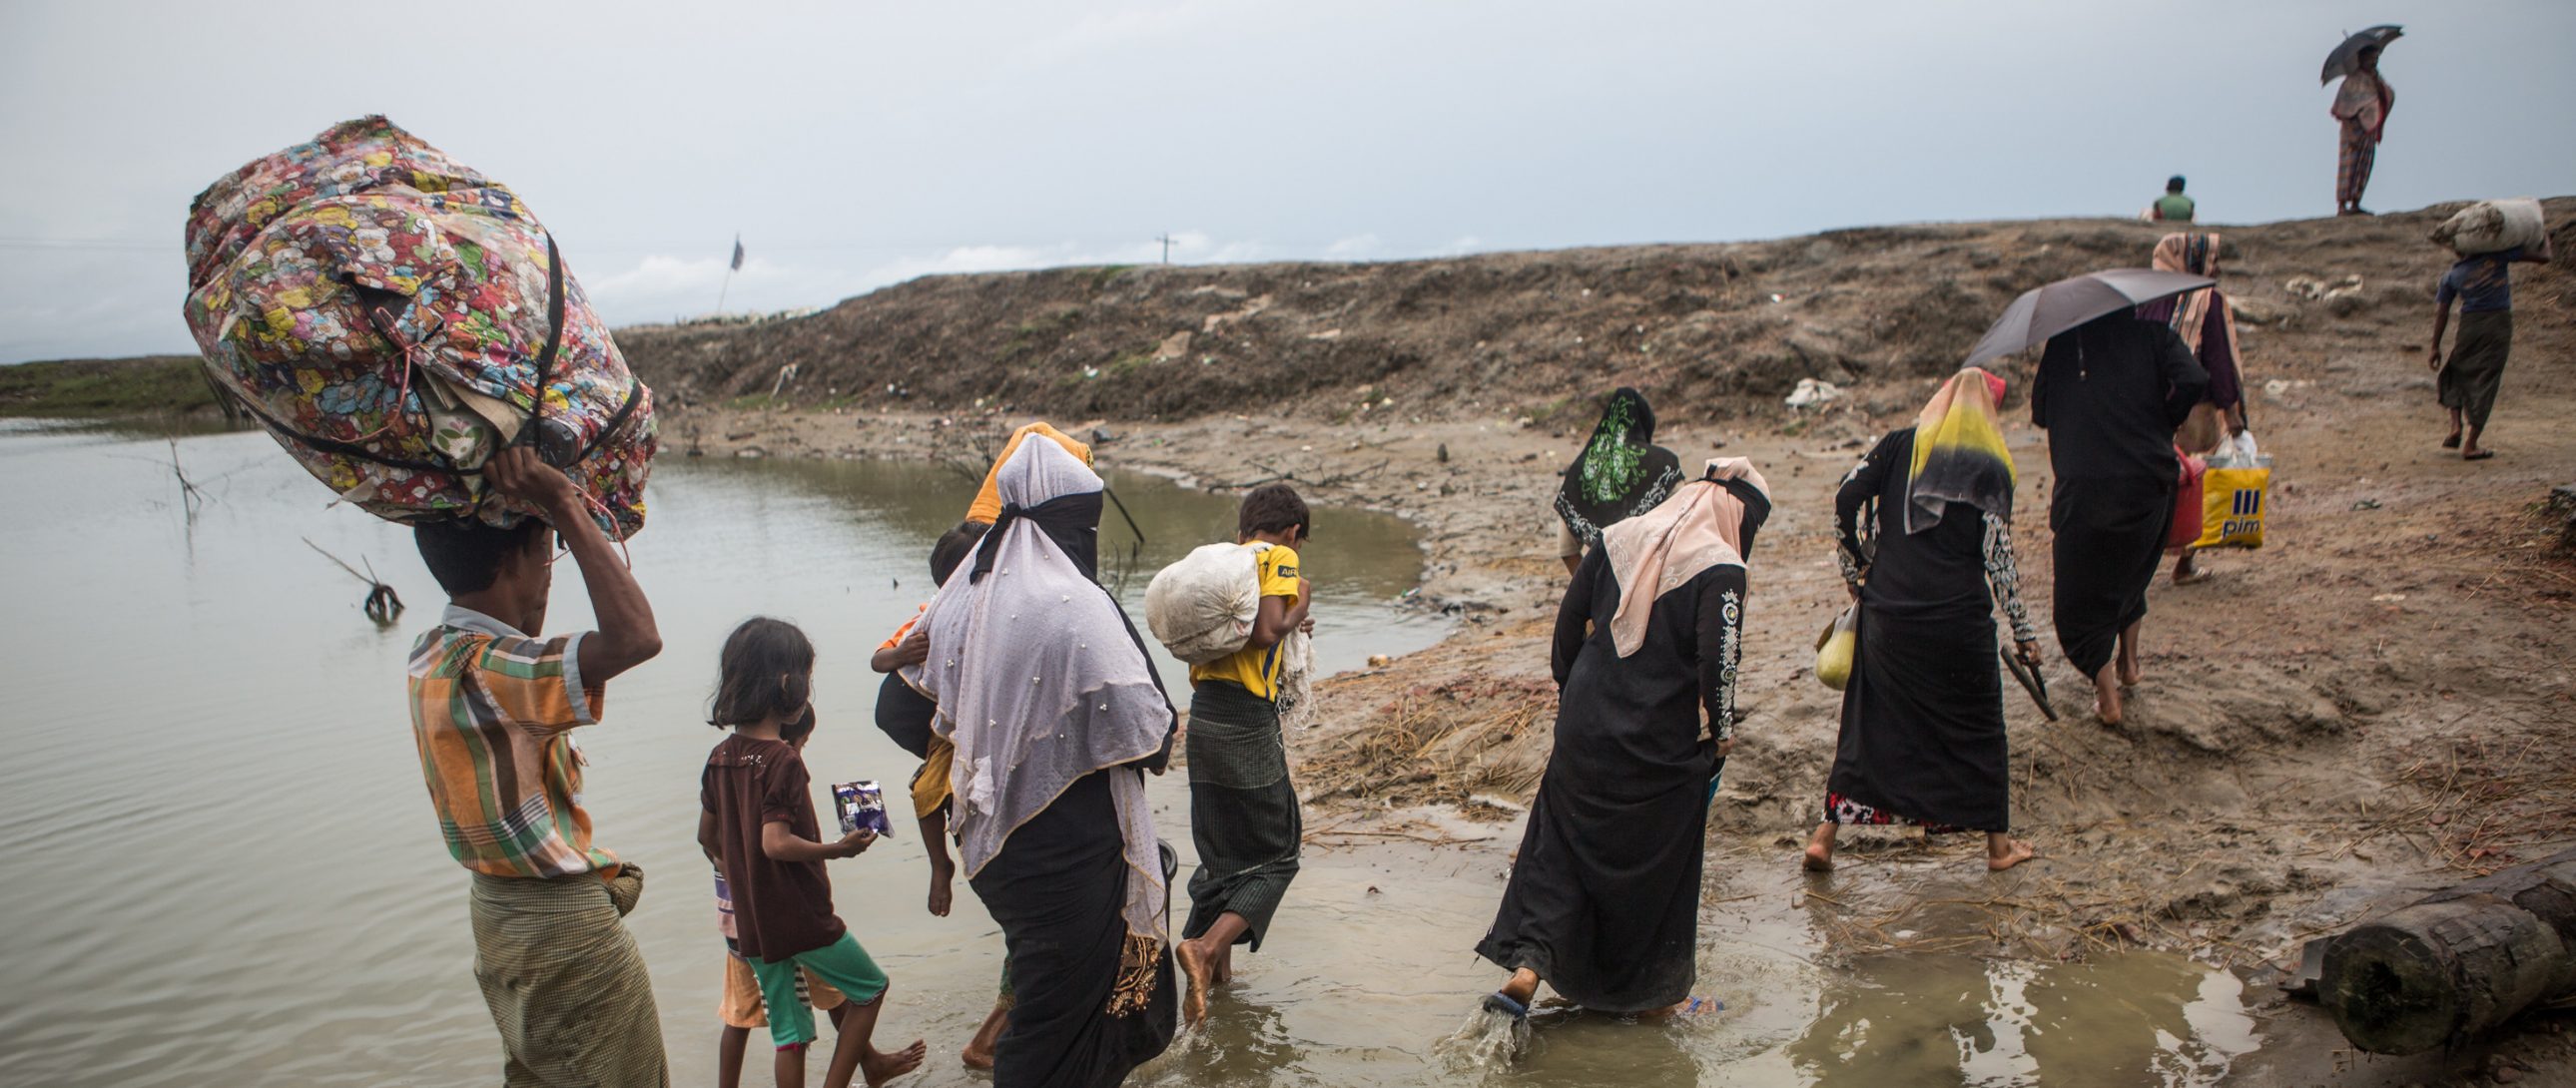 New Rohingya refugees arrive to Bangladesh by boat from Myanmar with what few possessions they were able to carry when fleeing their villages in northern Rakhine State days before, Teknaf, Bangladesh, 28 September 2017. The Myanmar military's scorched-earth campaign continued through late September and early October, driving the number of refugees who have arrived in Bangladesh since 25 August above 520,000. © Andrew Stanbridge / Amnesty International